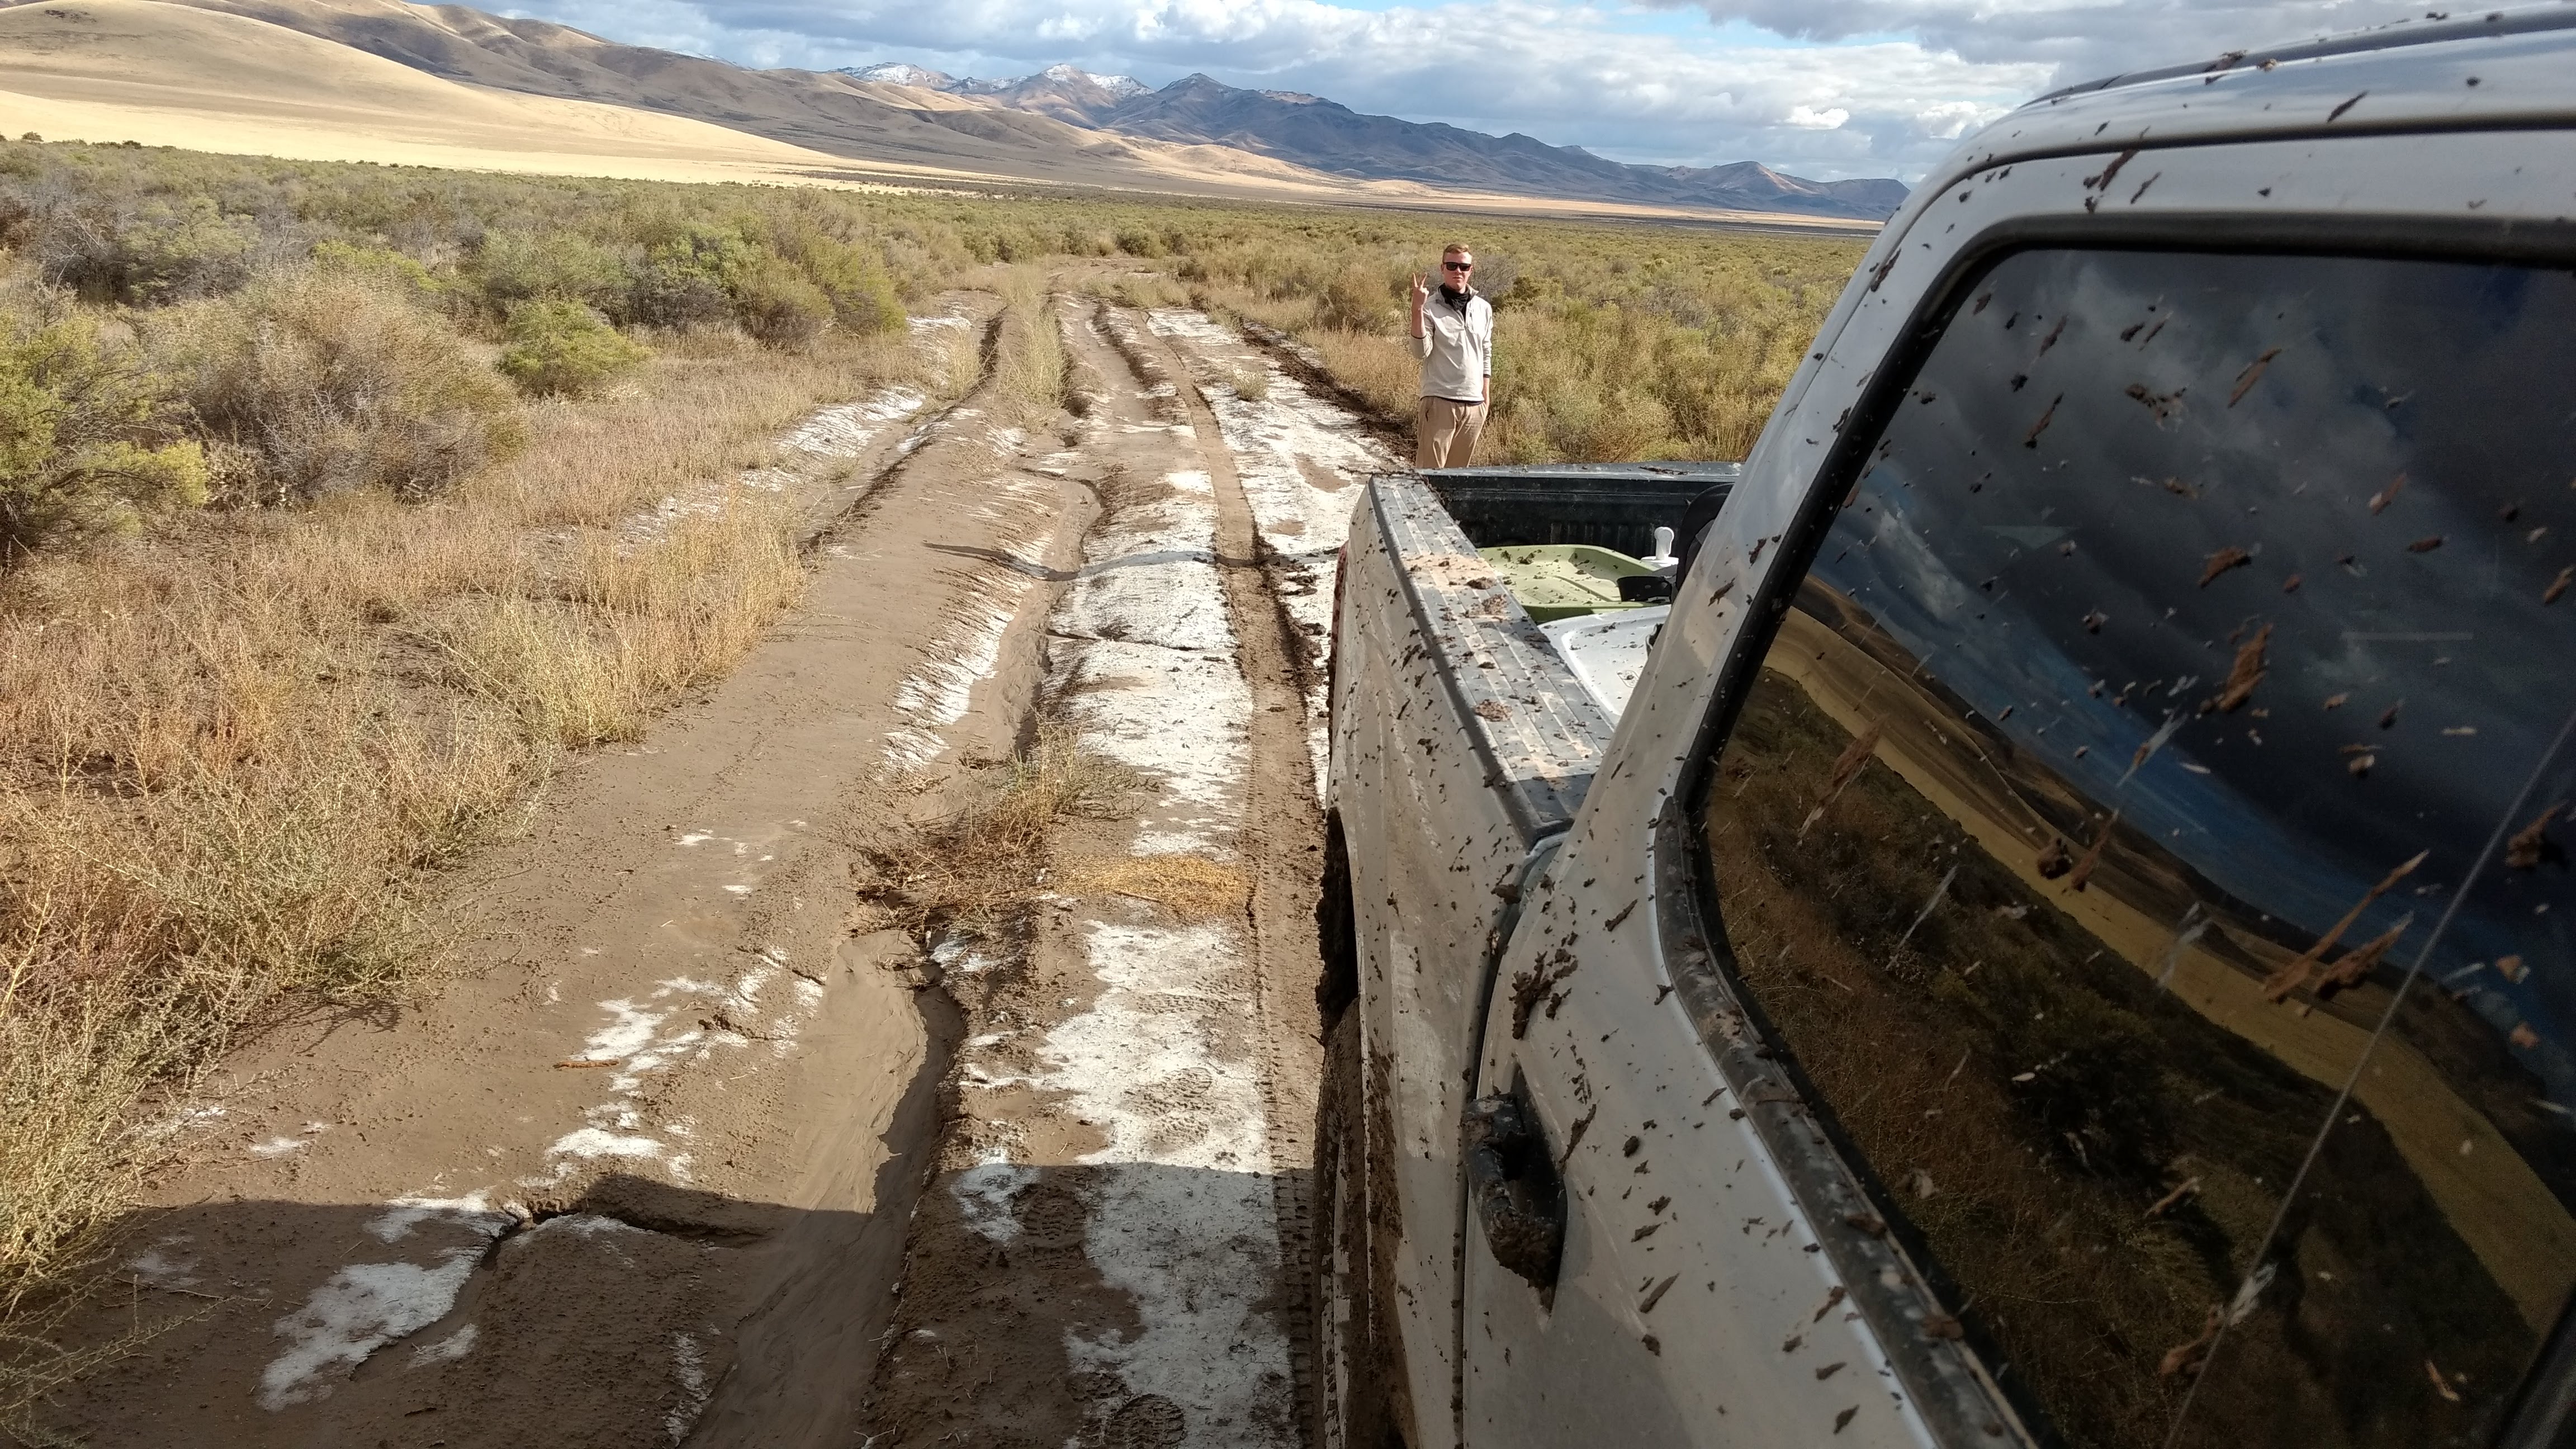 Our Truck Splattered and the Road we Came Down, Sept 2017.